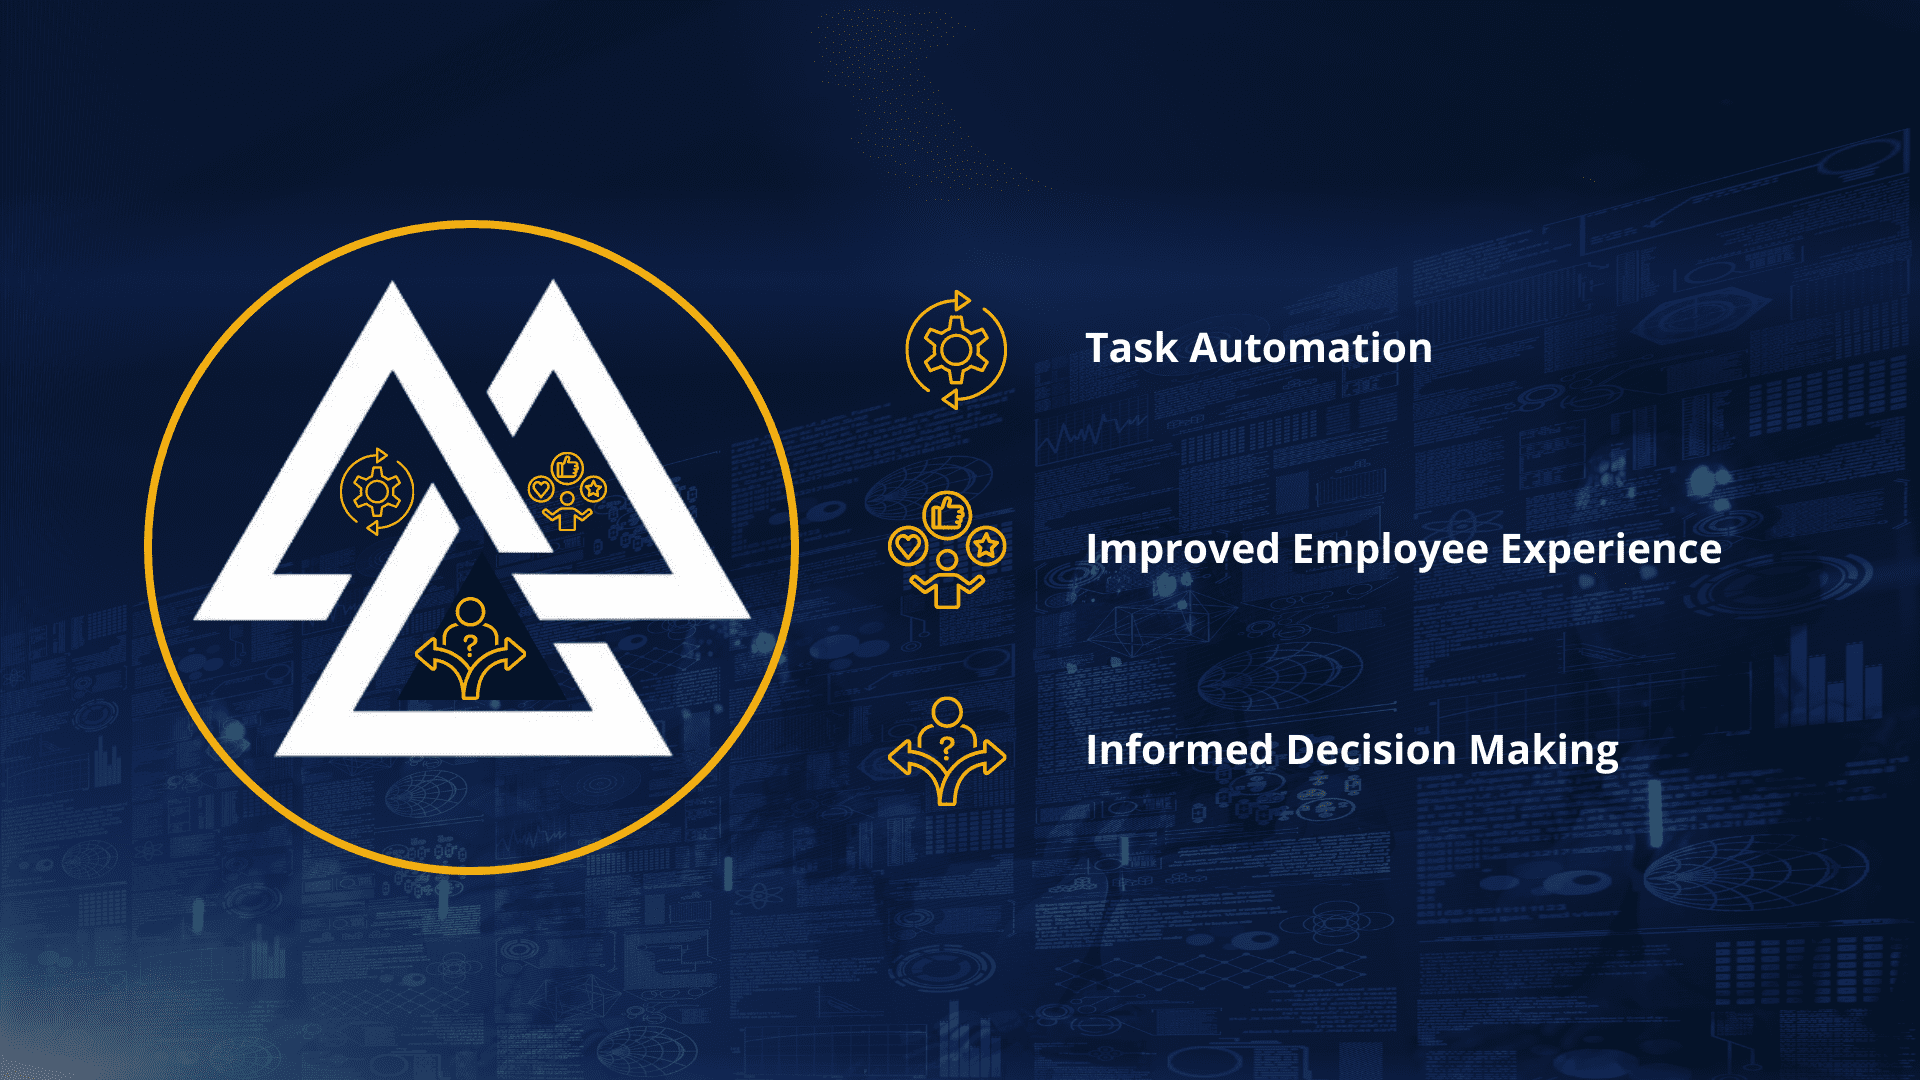 The image explains how AI in Hybrid Workplace will transform task automation, employee experience and informed decision-making.